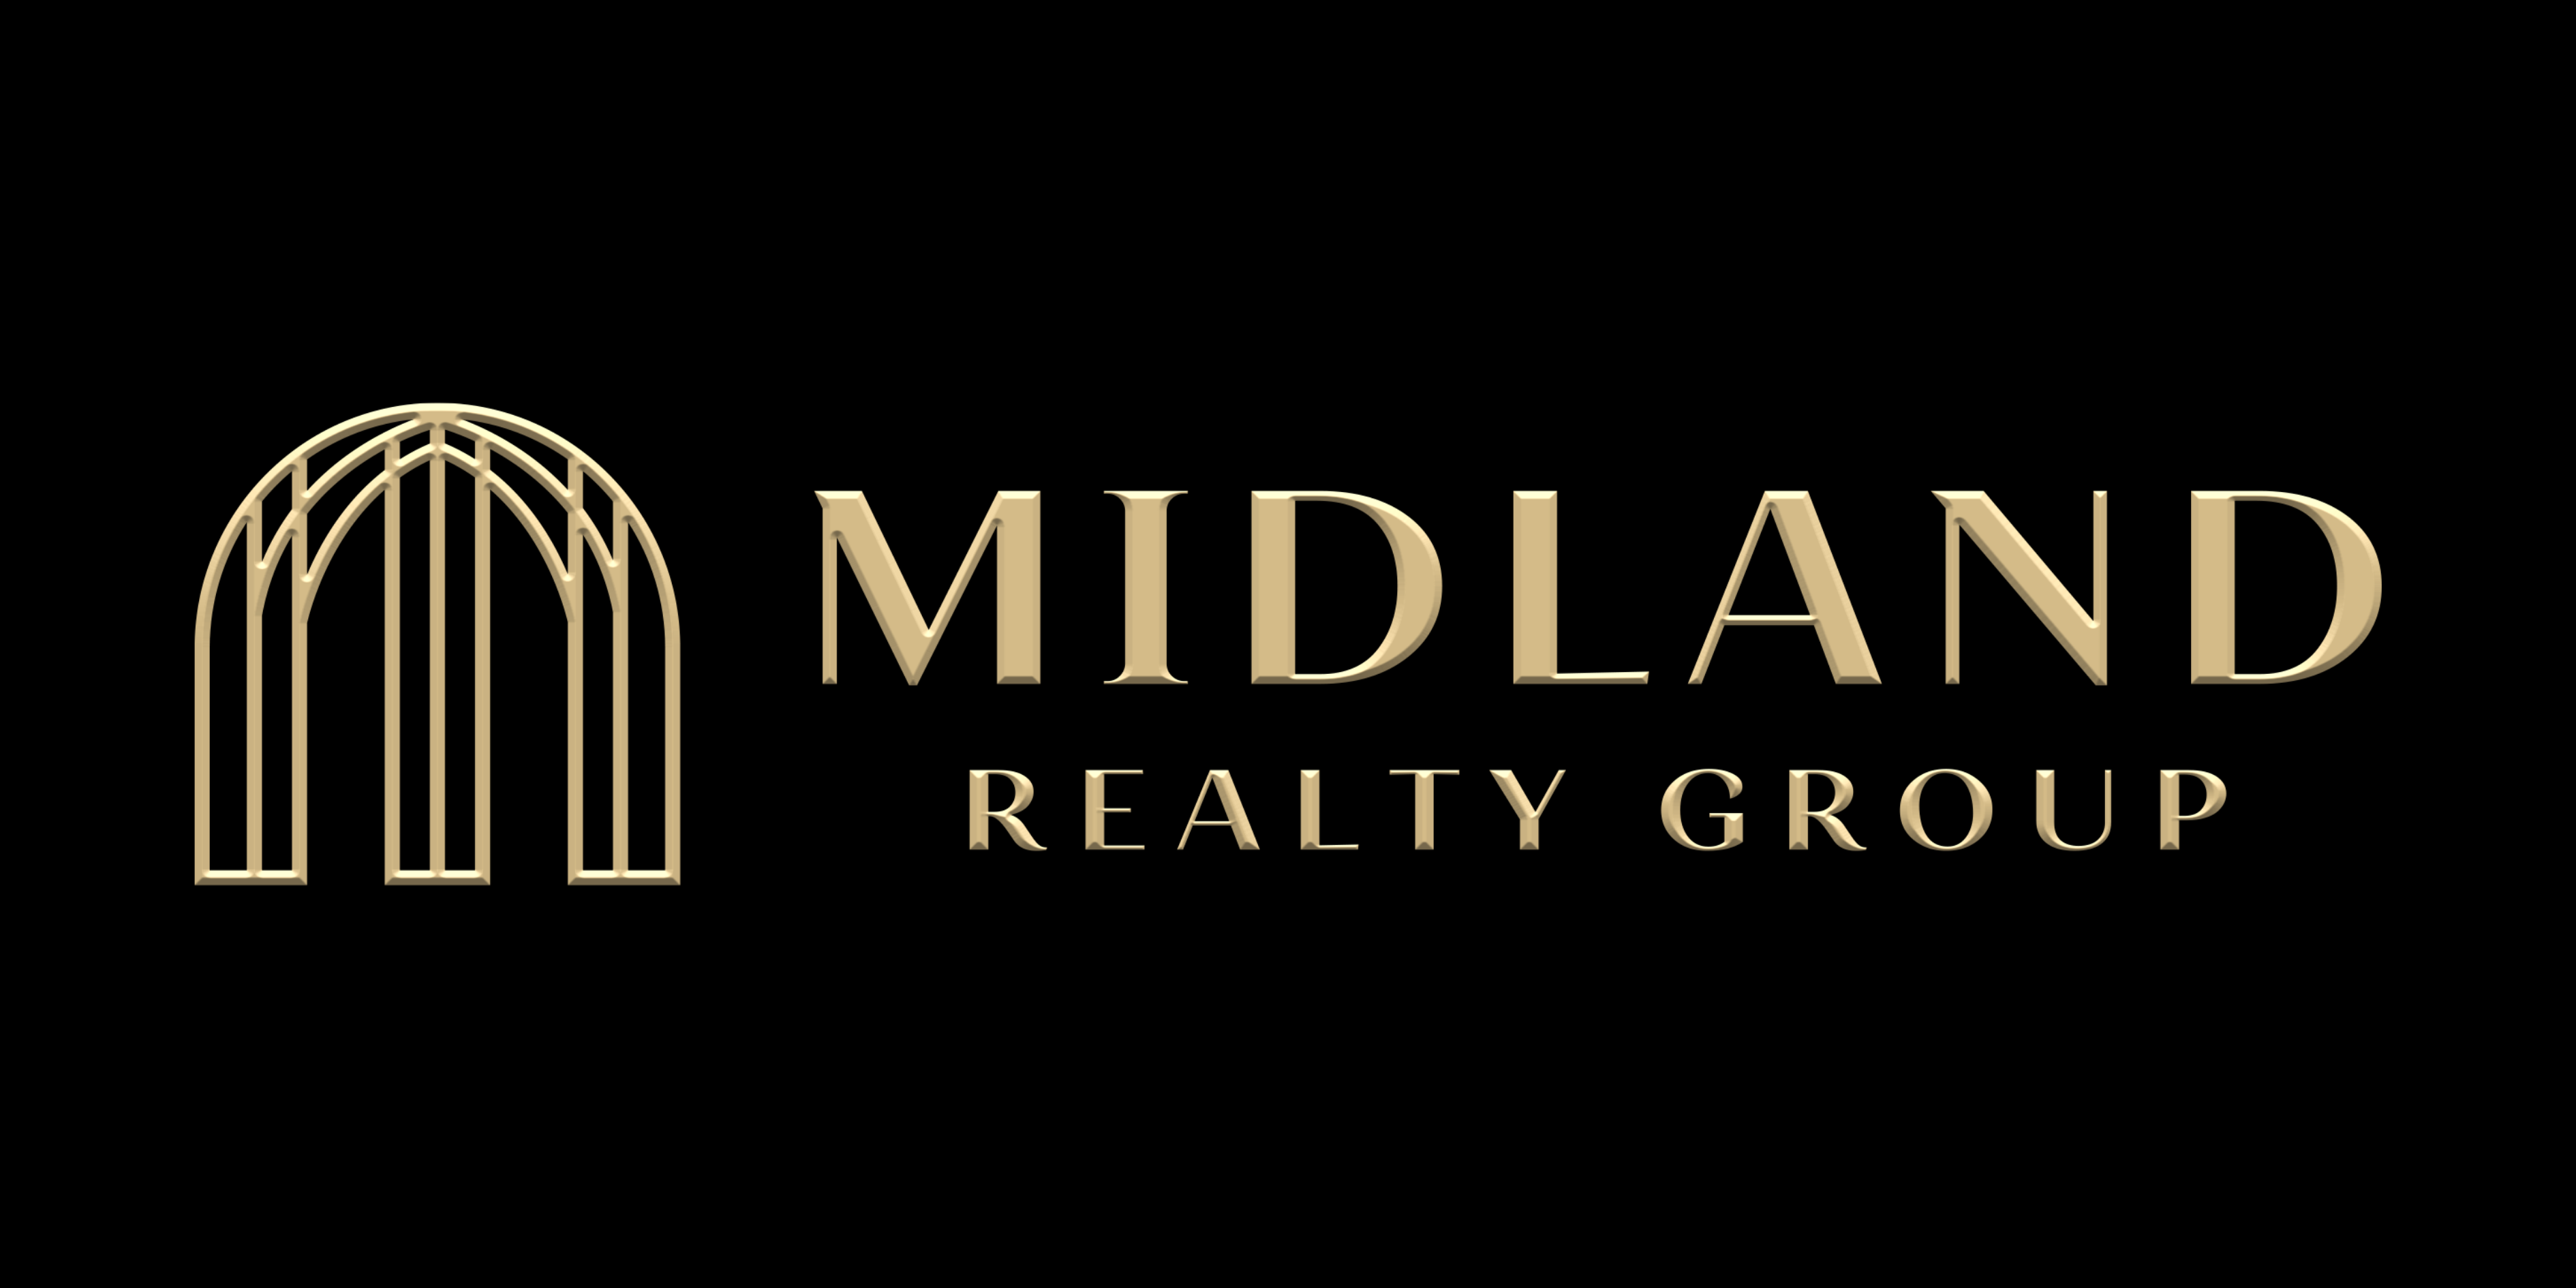 Midland Realty Group - Real Estate Agents and Property Managers